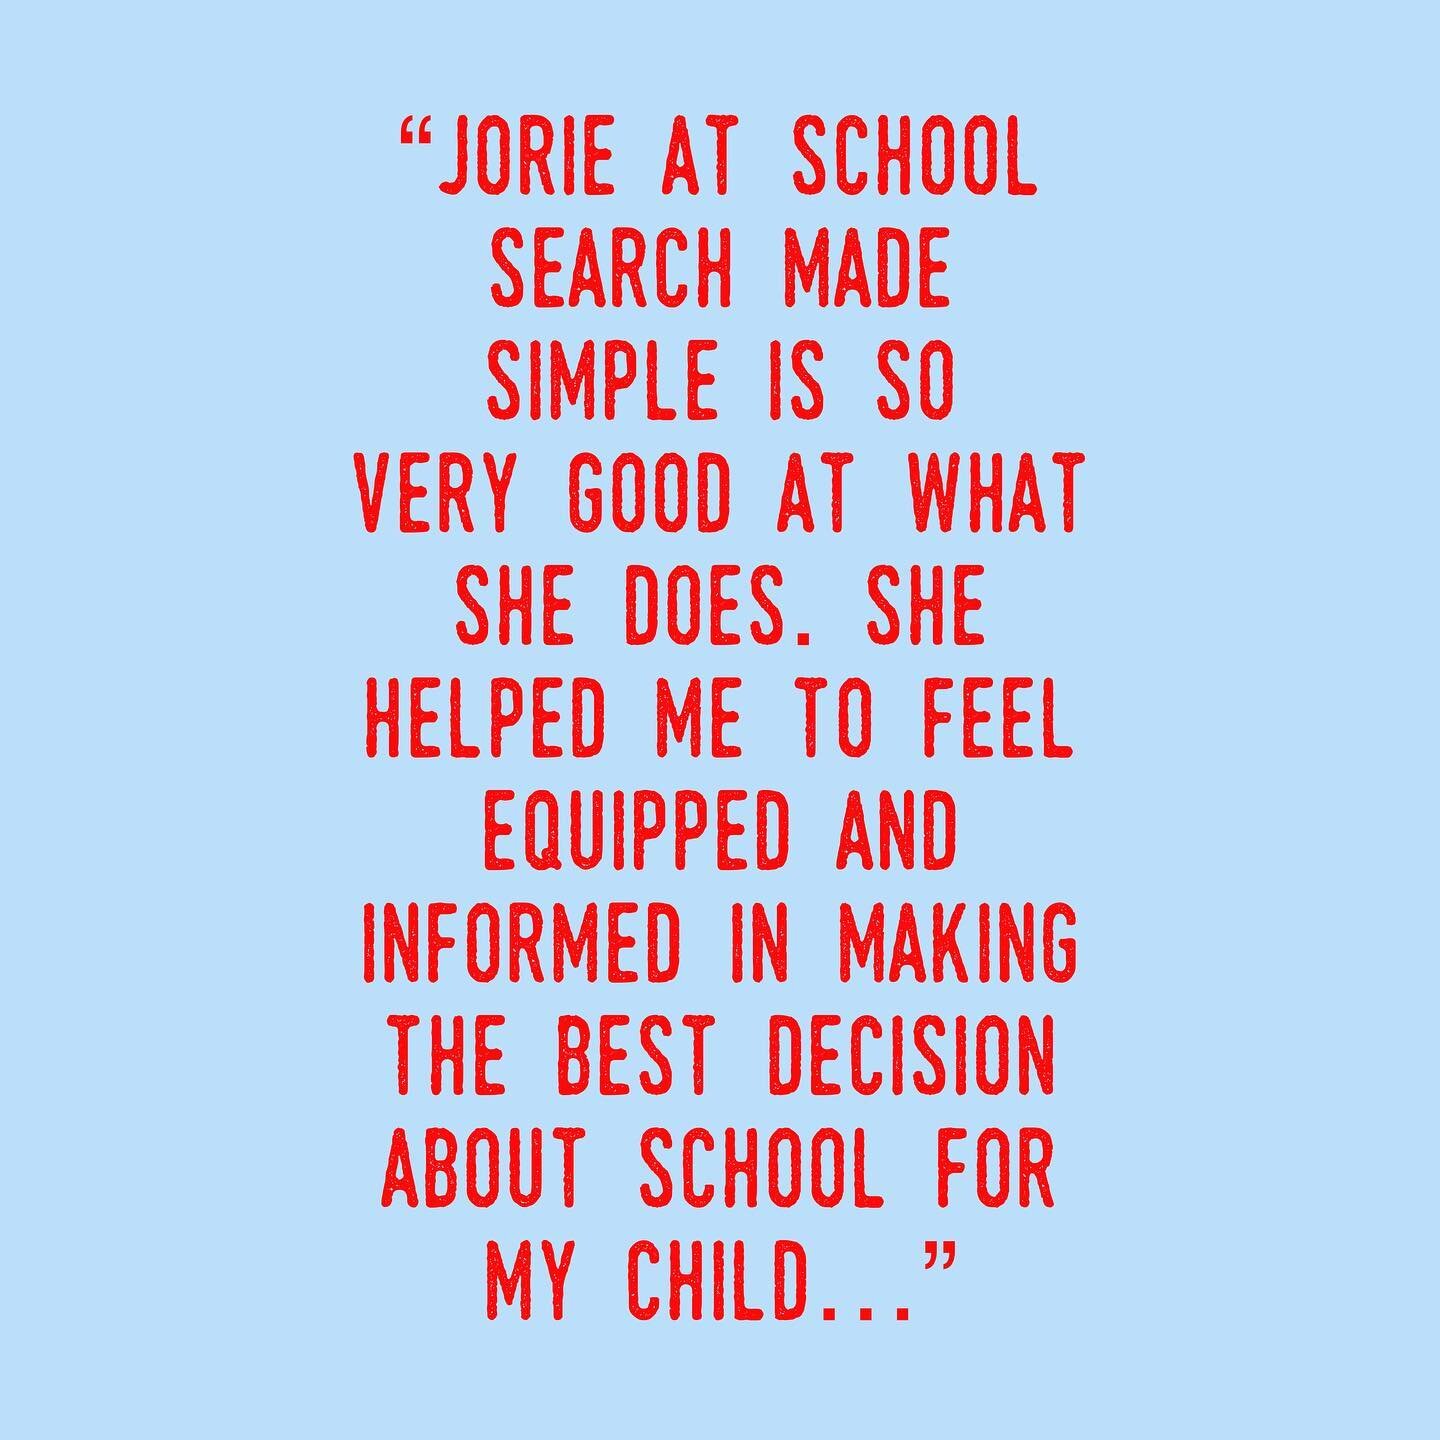 Your reviews matter to us and to other parents out there just like you. Thank you!!! ❤️❤️ #schoolsearchmadesimple #charleston #educationincharleston #privateschools #ieca #educationalconsulting #elementaryschool #middleschool